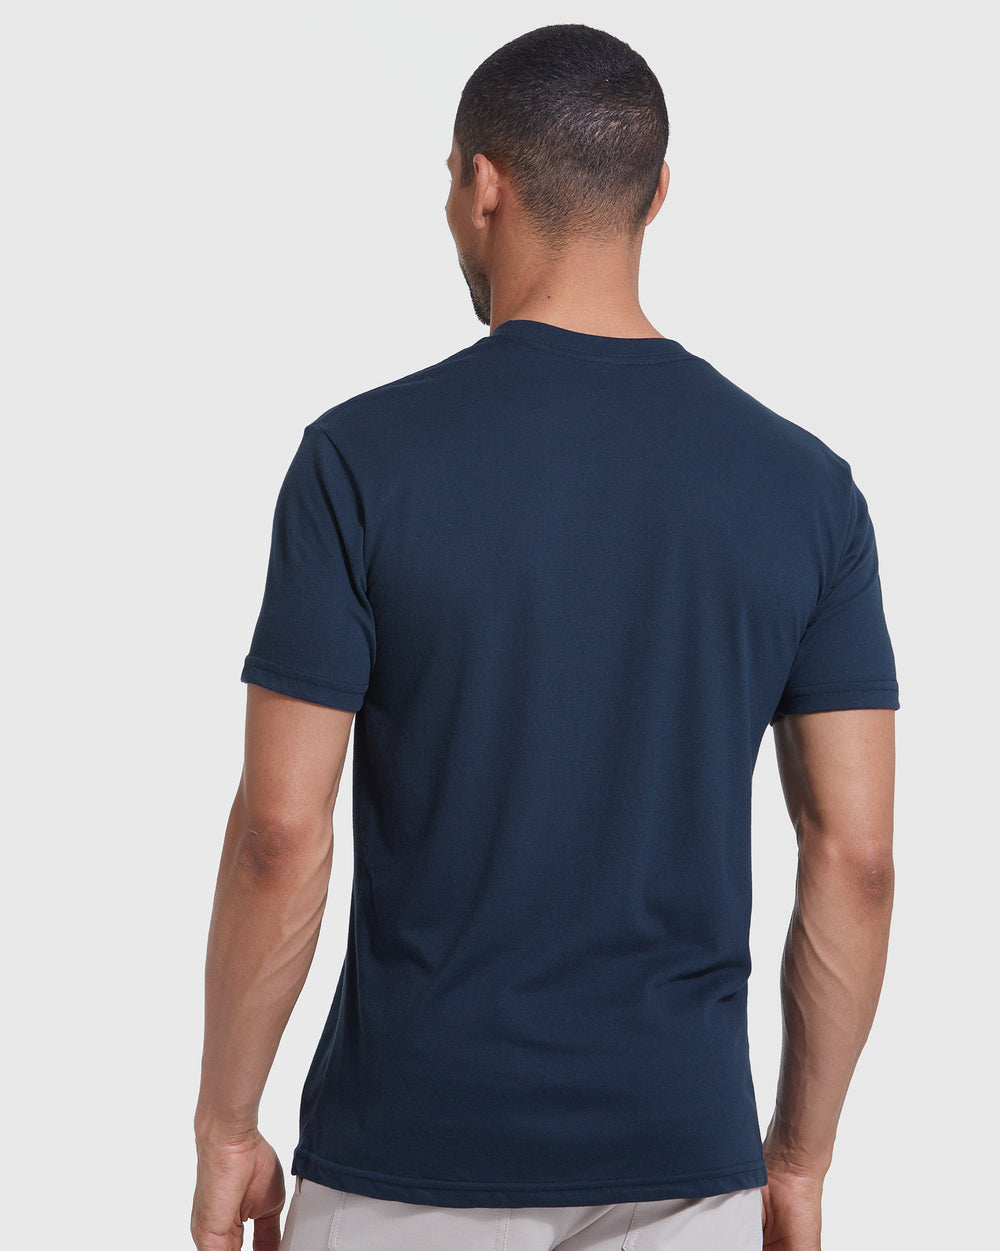 Navy & Carbon Classic Crew Neck 2-Pack